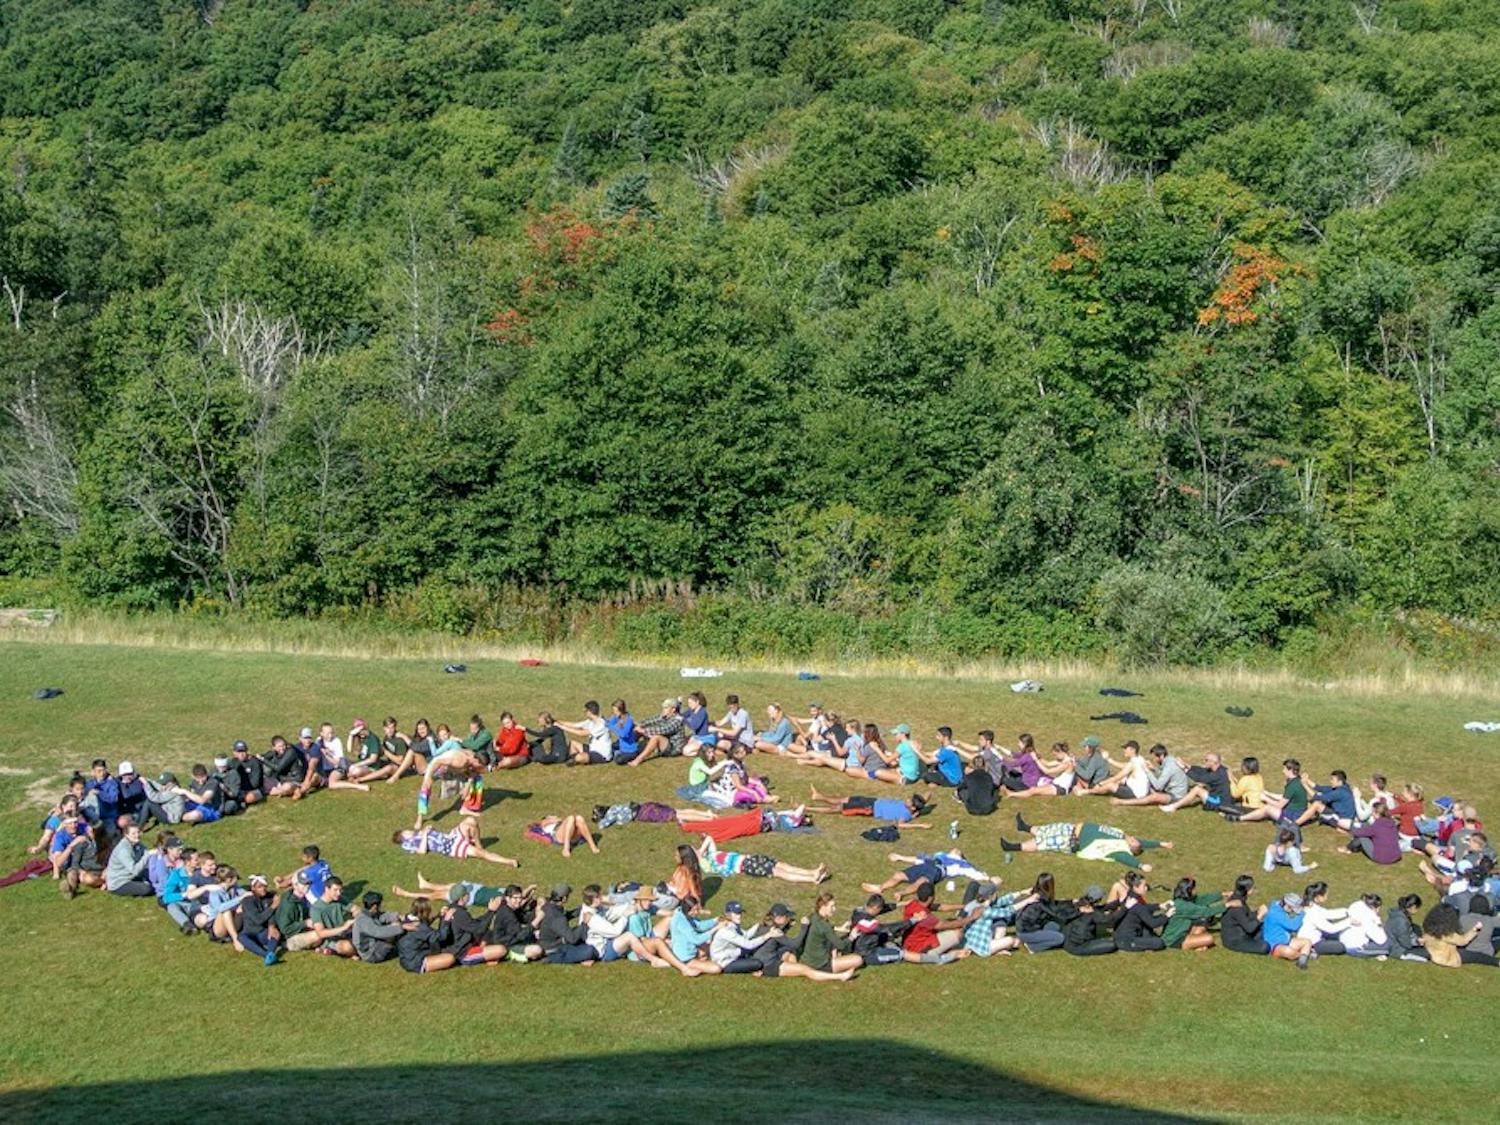 Members of the Class of 2020 participate in bonding activities at the Lodj during First-Year Trips.